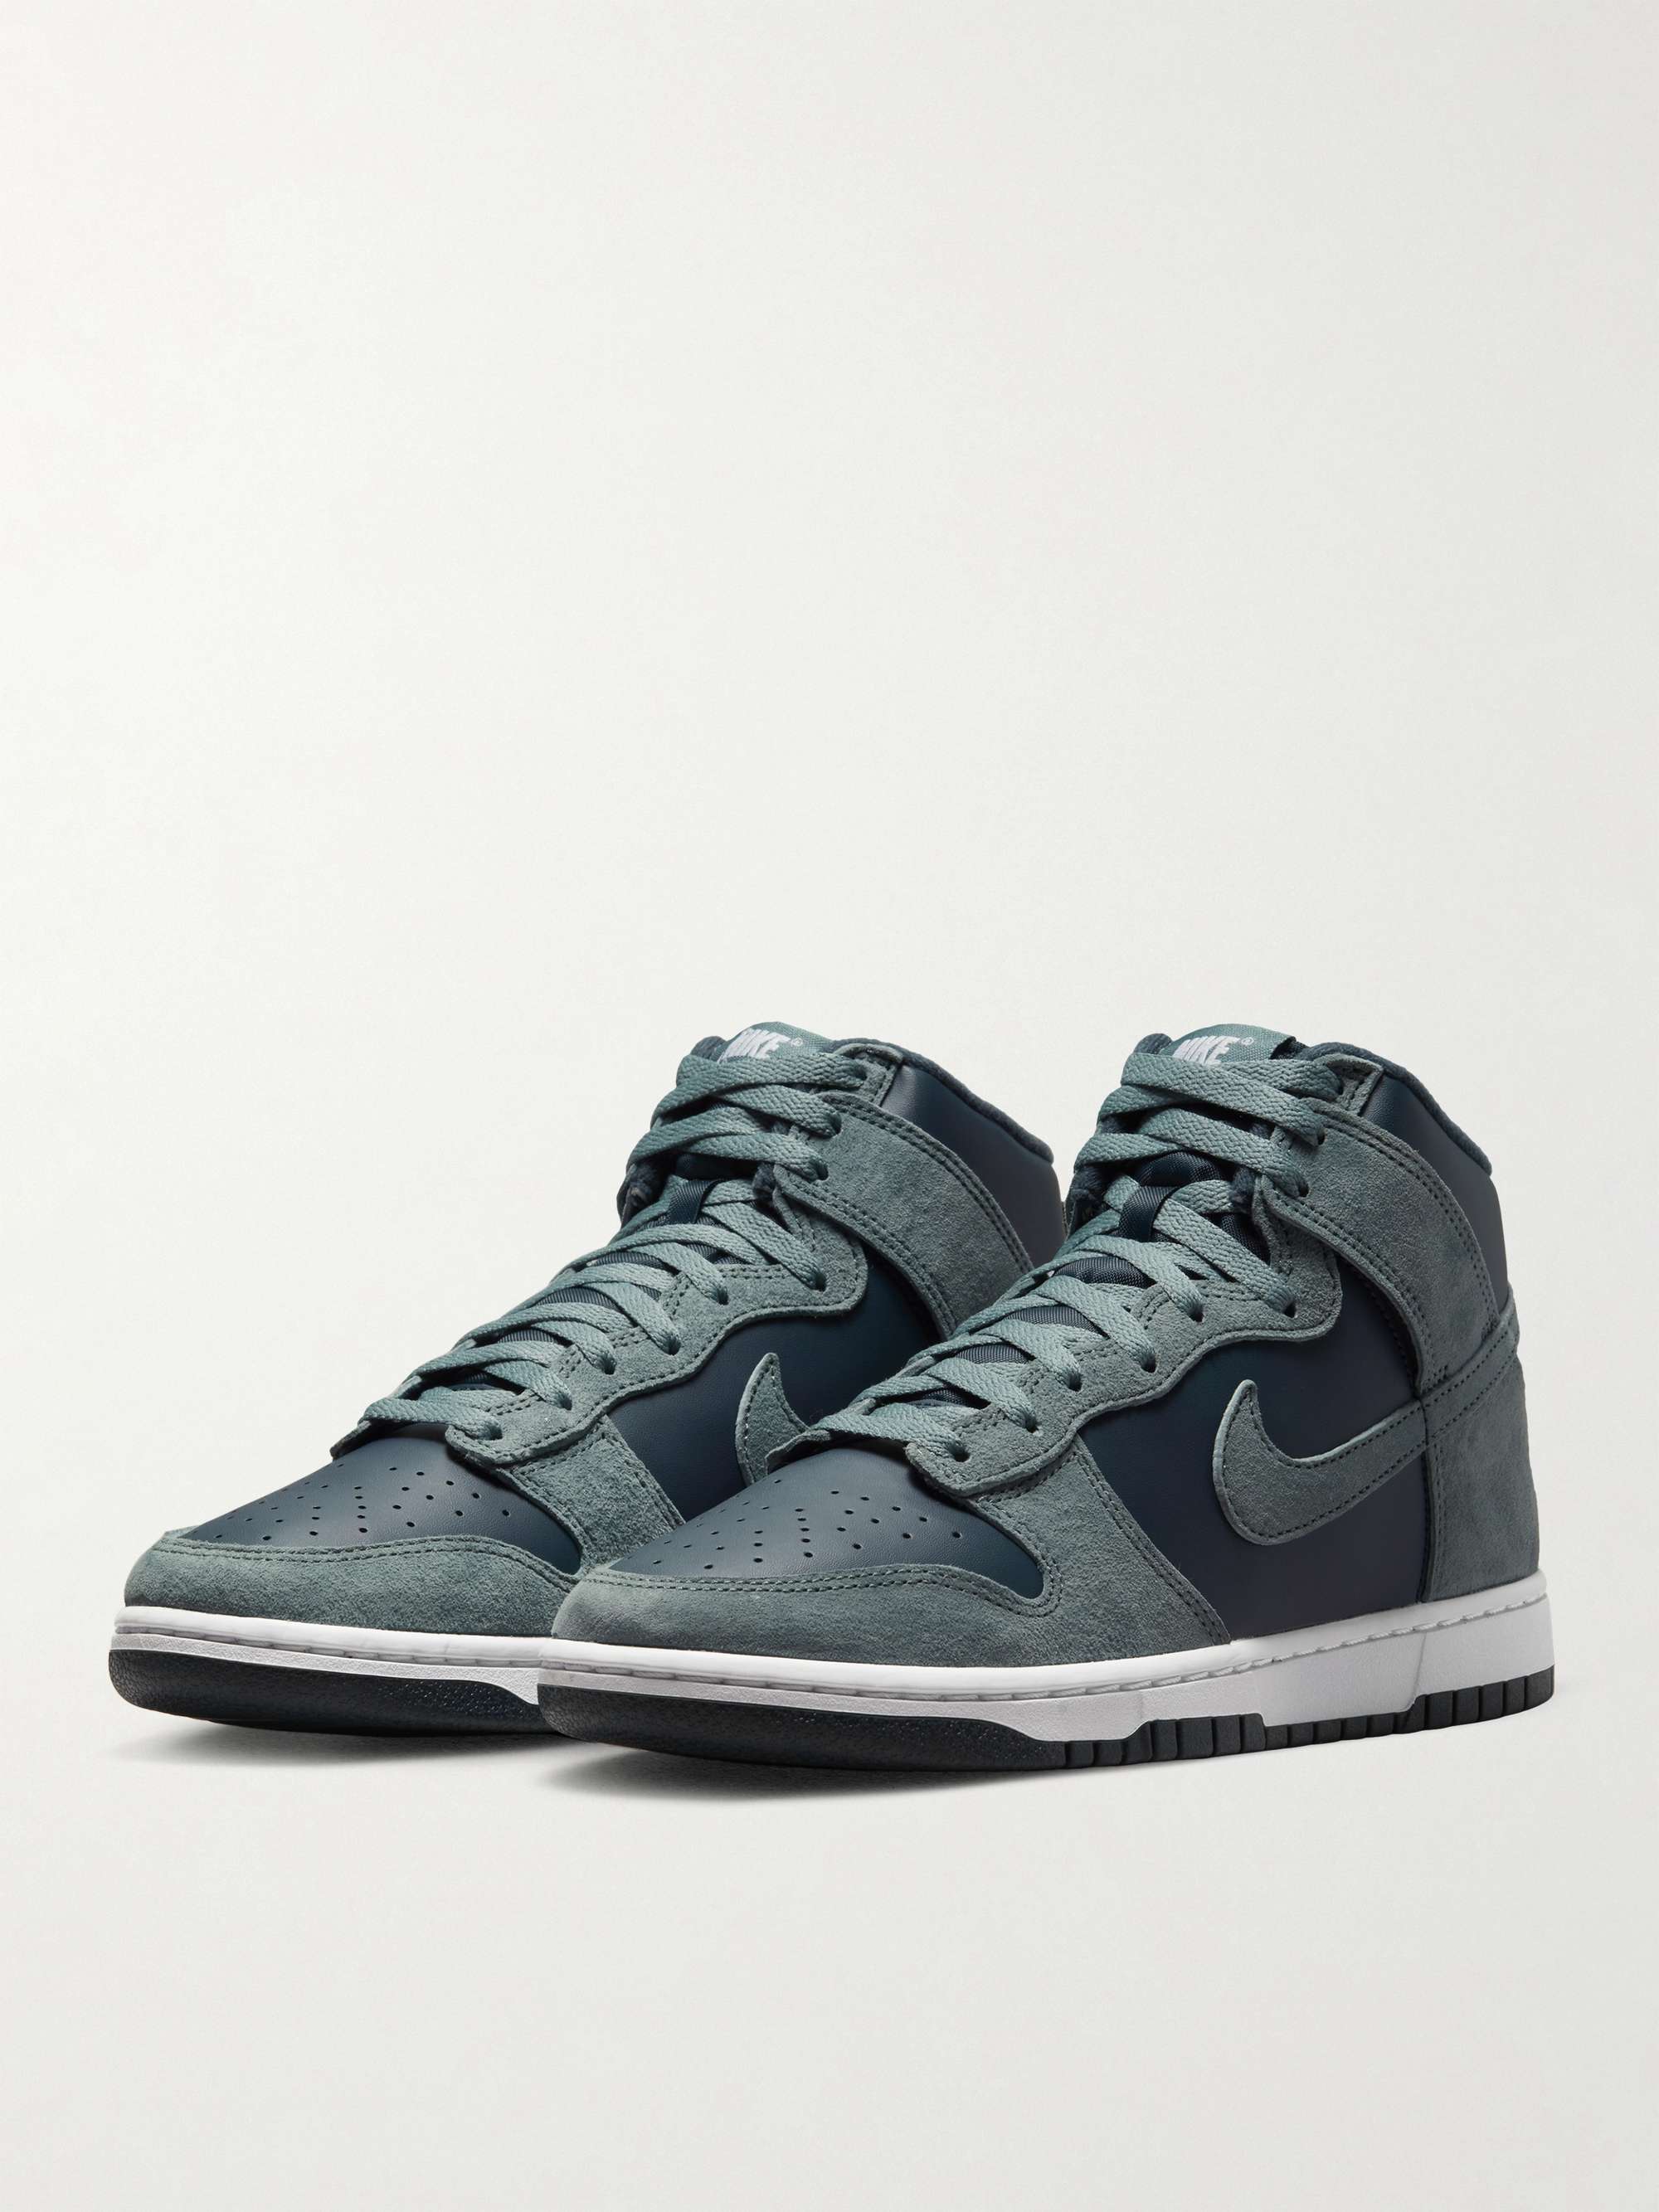 NIKE Dunk High Leather Sneakers | MR PORTER